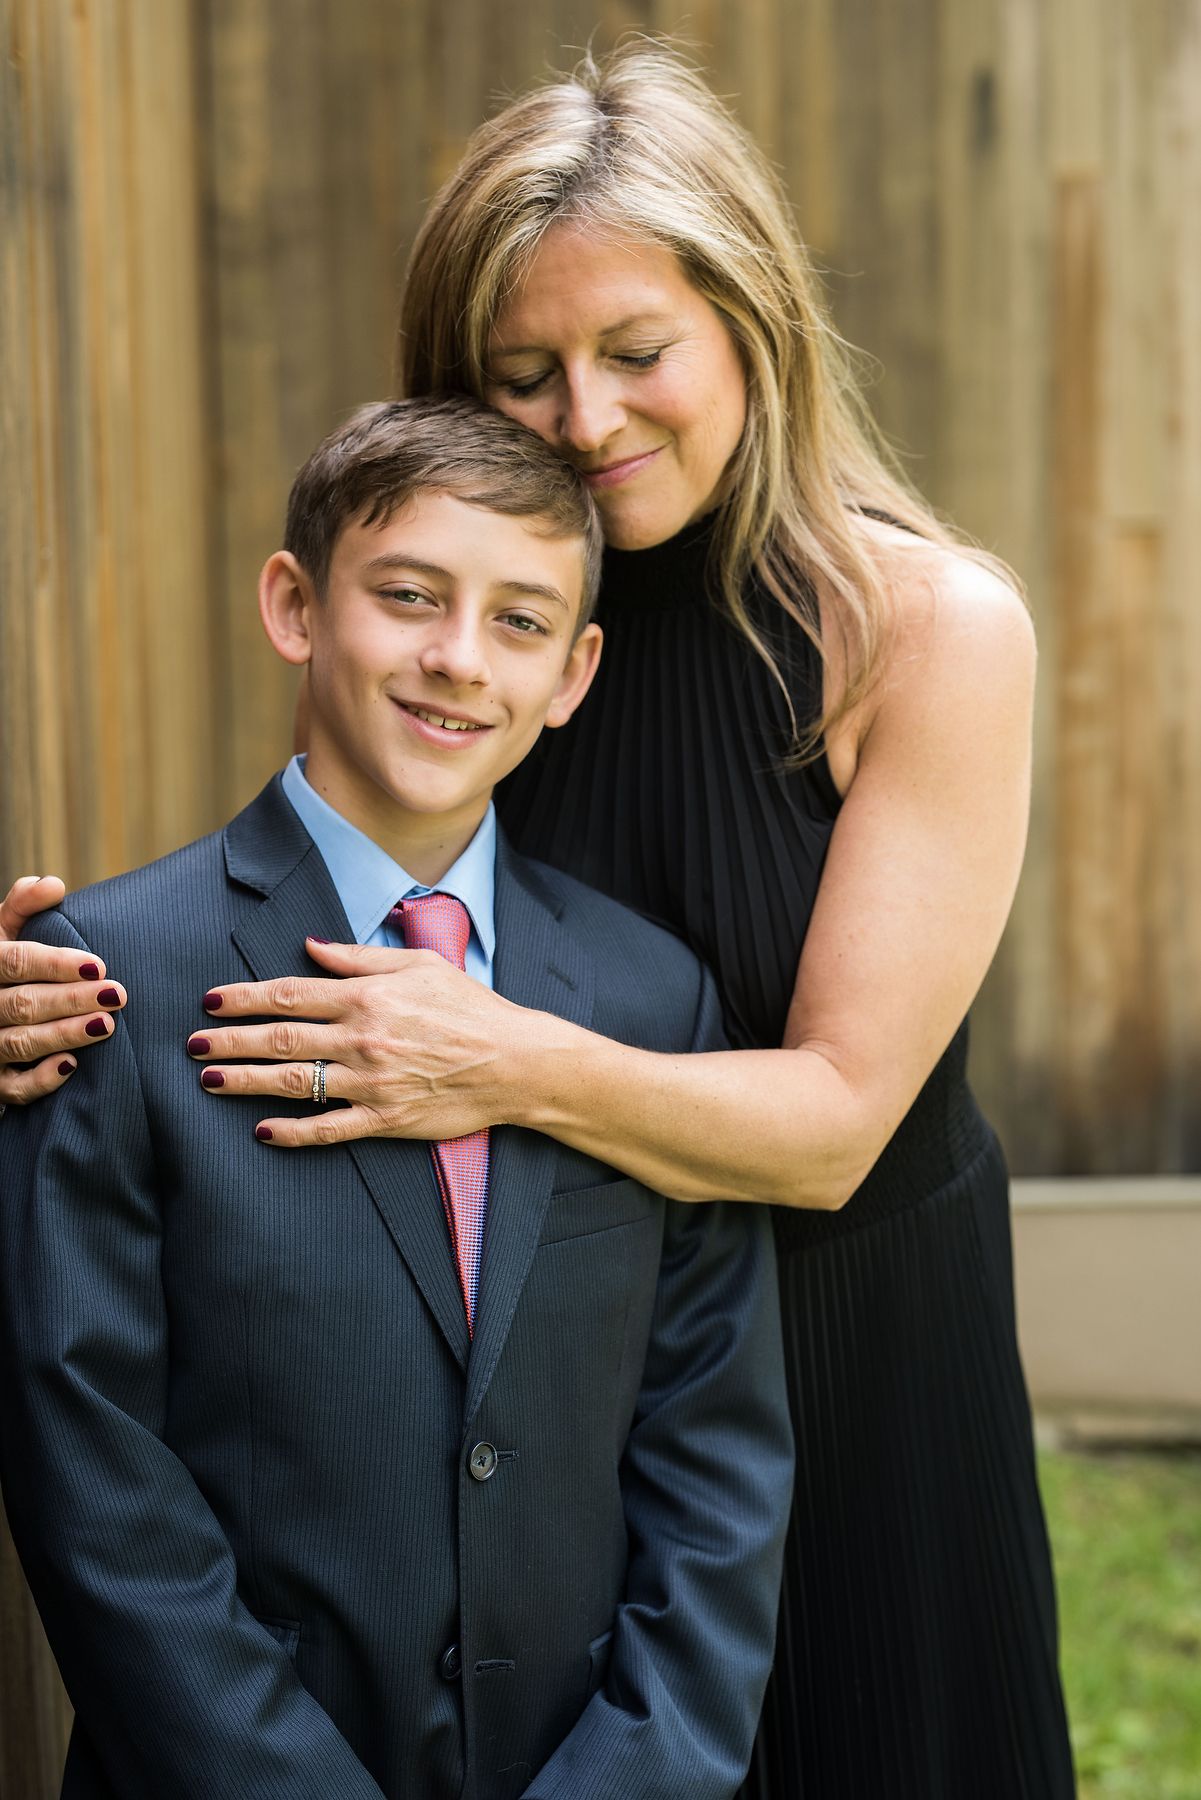 Mother and Son Bar Mitzvah Portrait